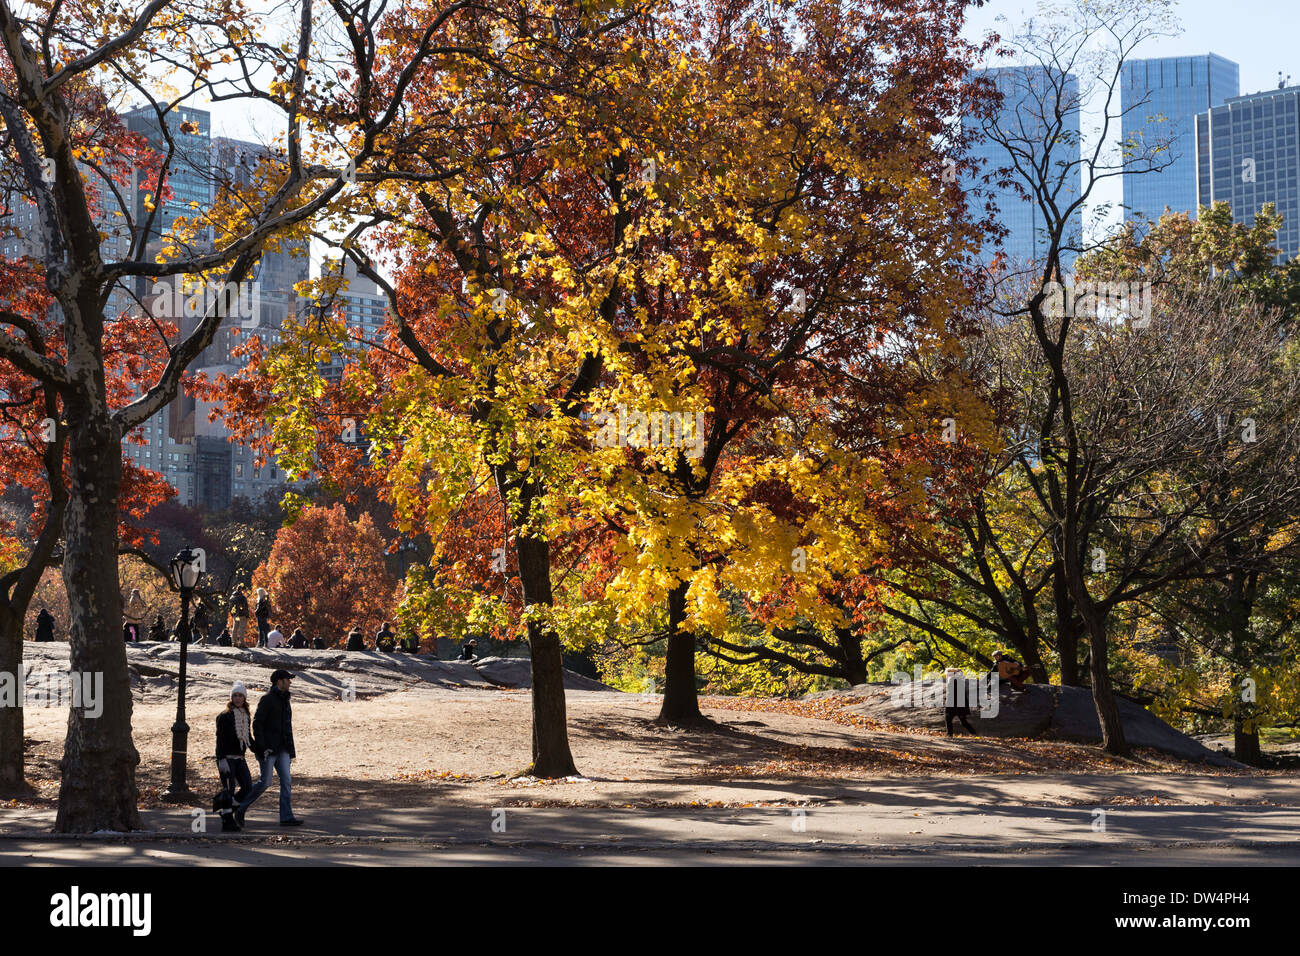 Central Park with Fall Foliage, NYC Stock Photo